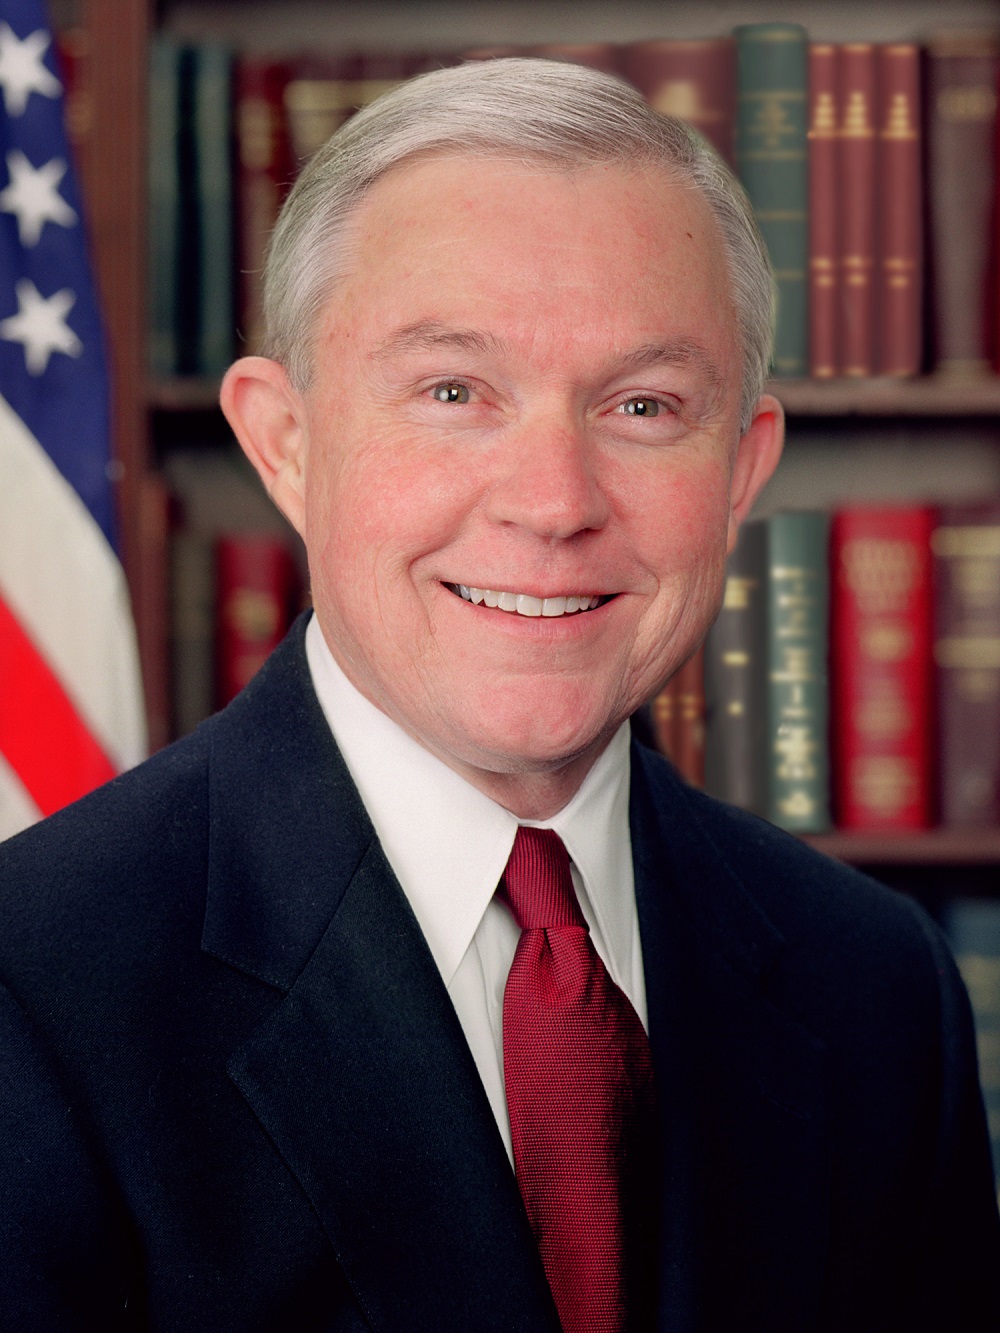 Security Industry Association Announces Sen. Jeff Sessions as Keynote